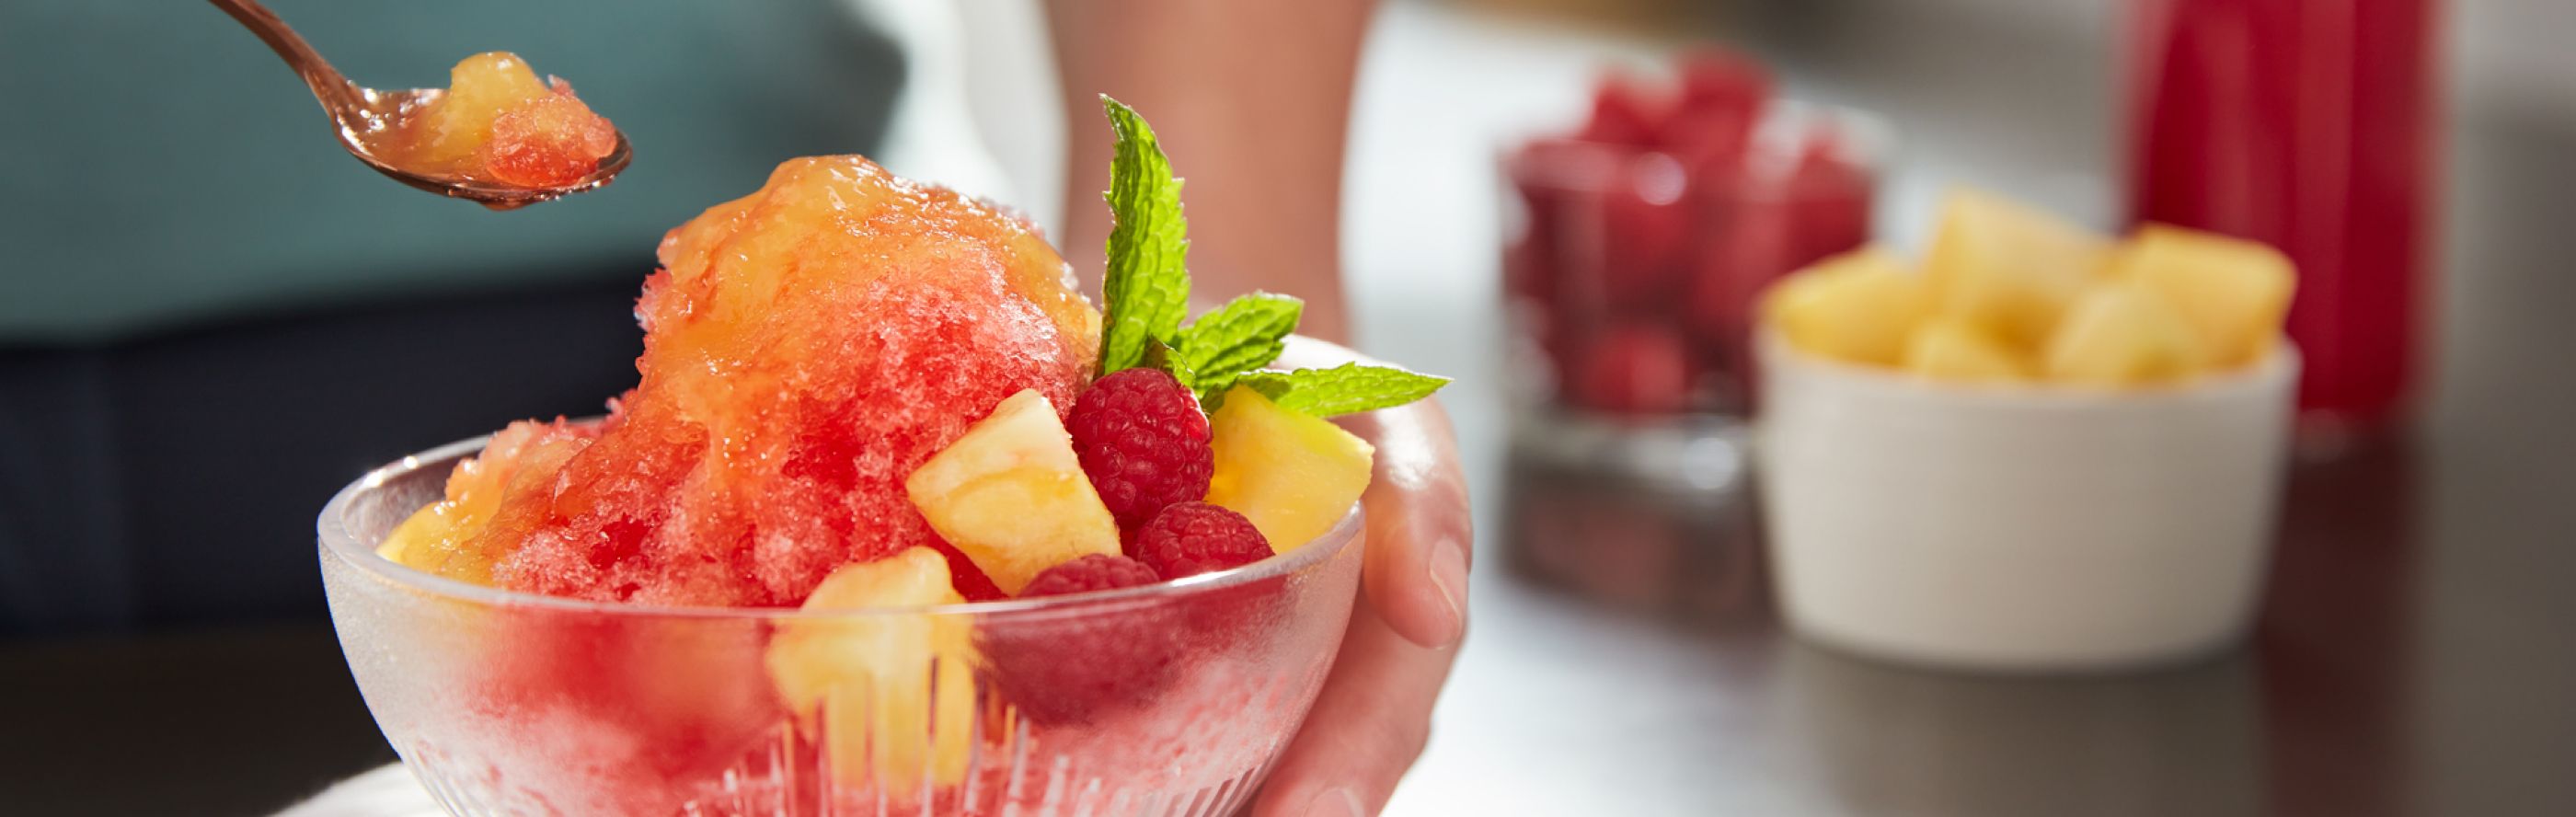 Frozen ice desserts topped with syrup and chopped fruits